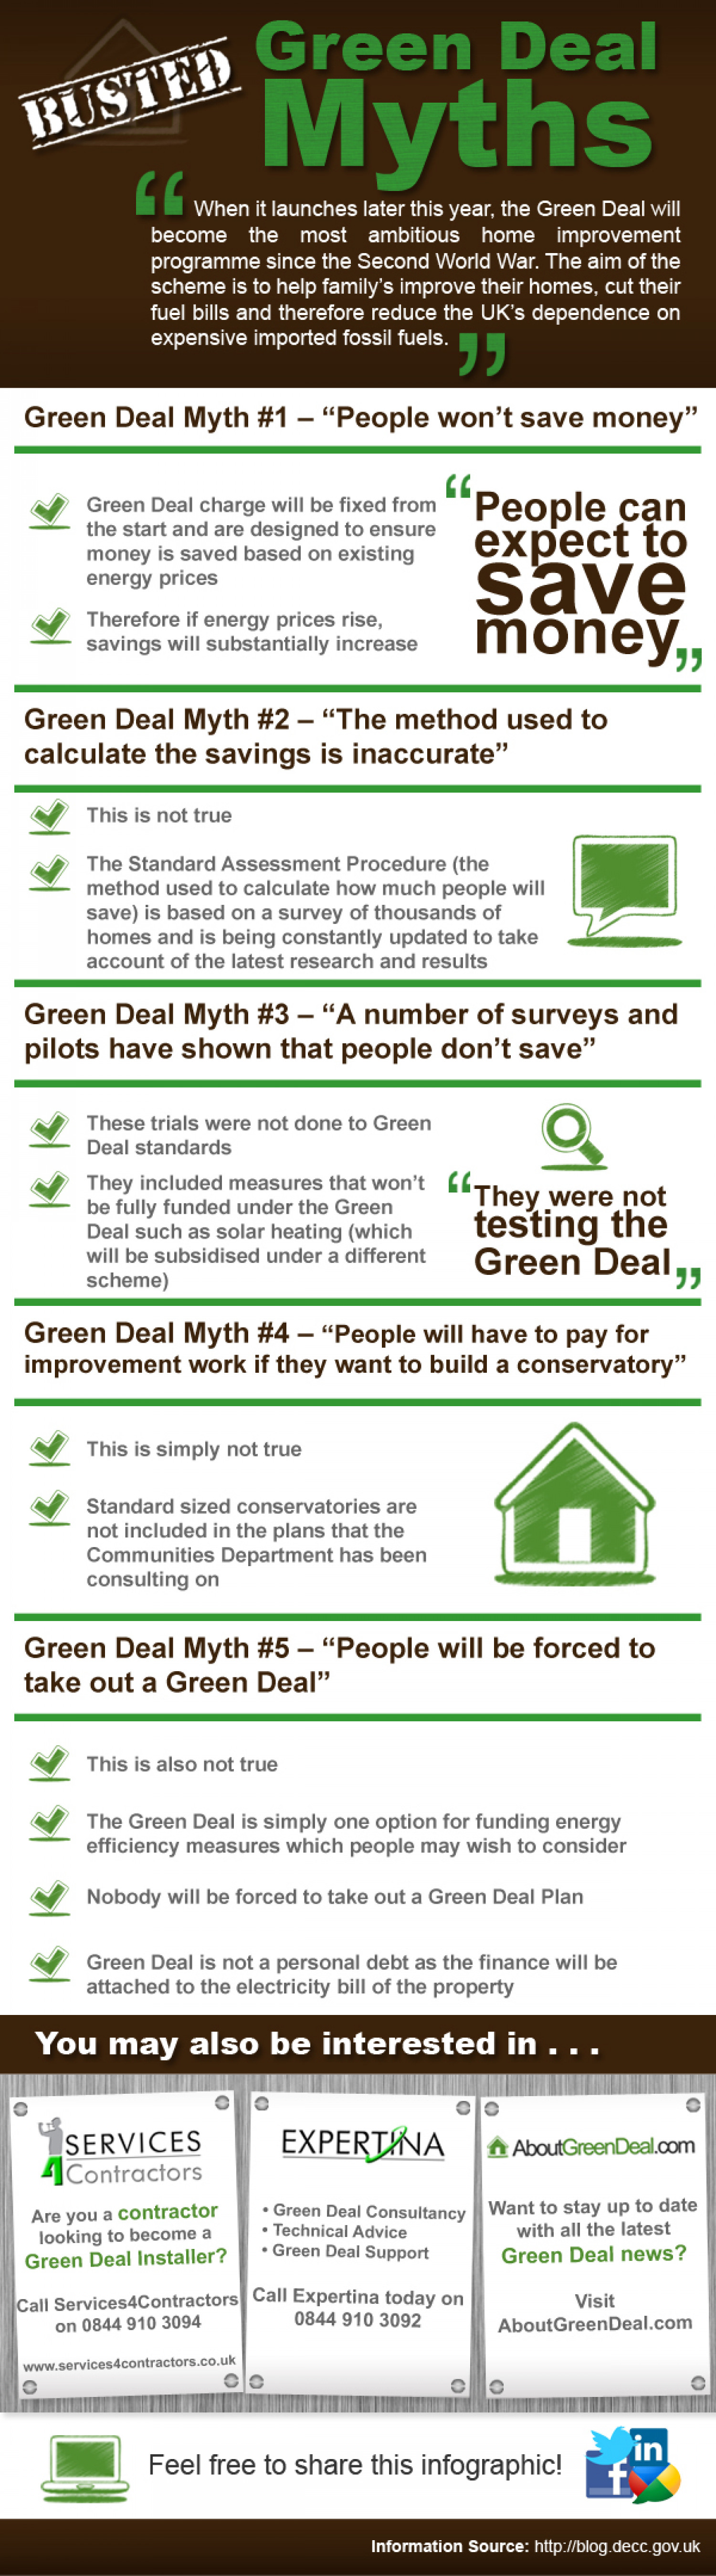 Green Deal Myths Infographic